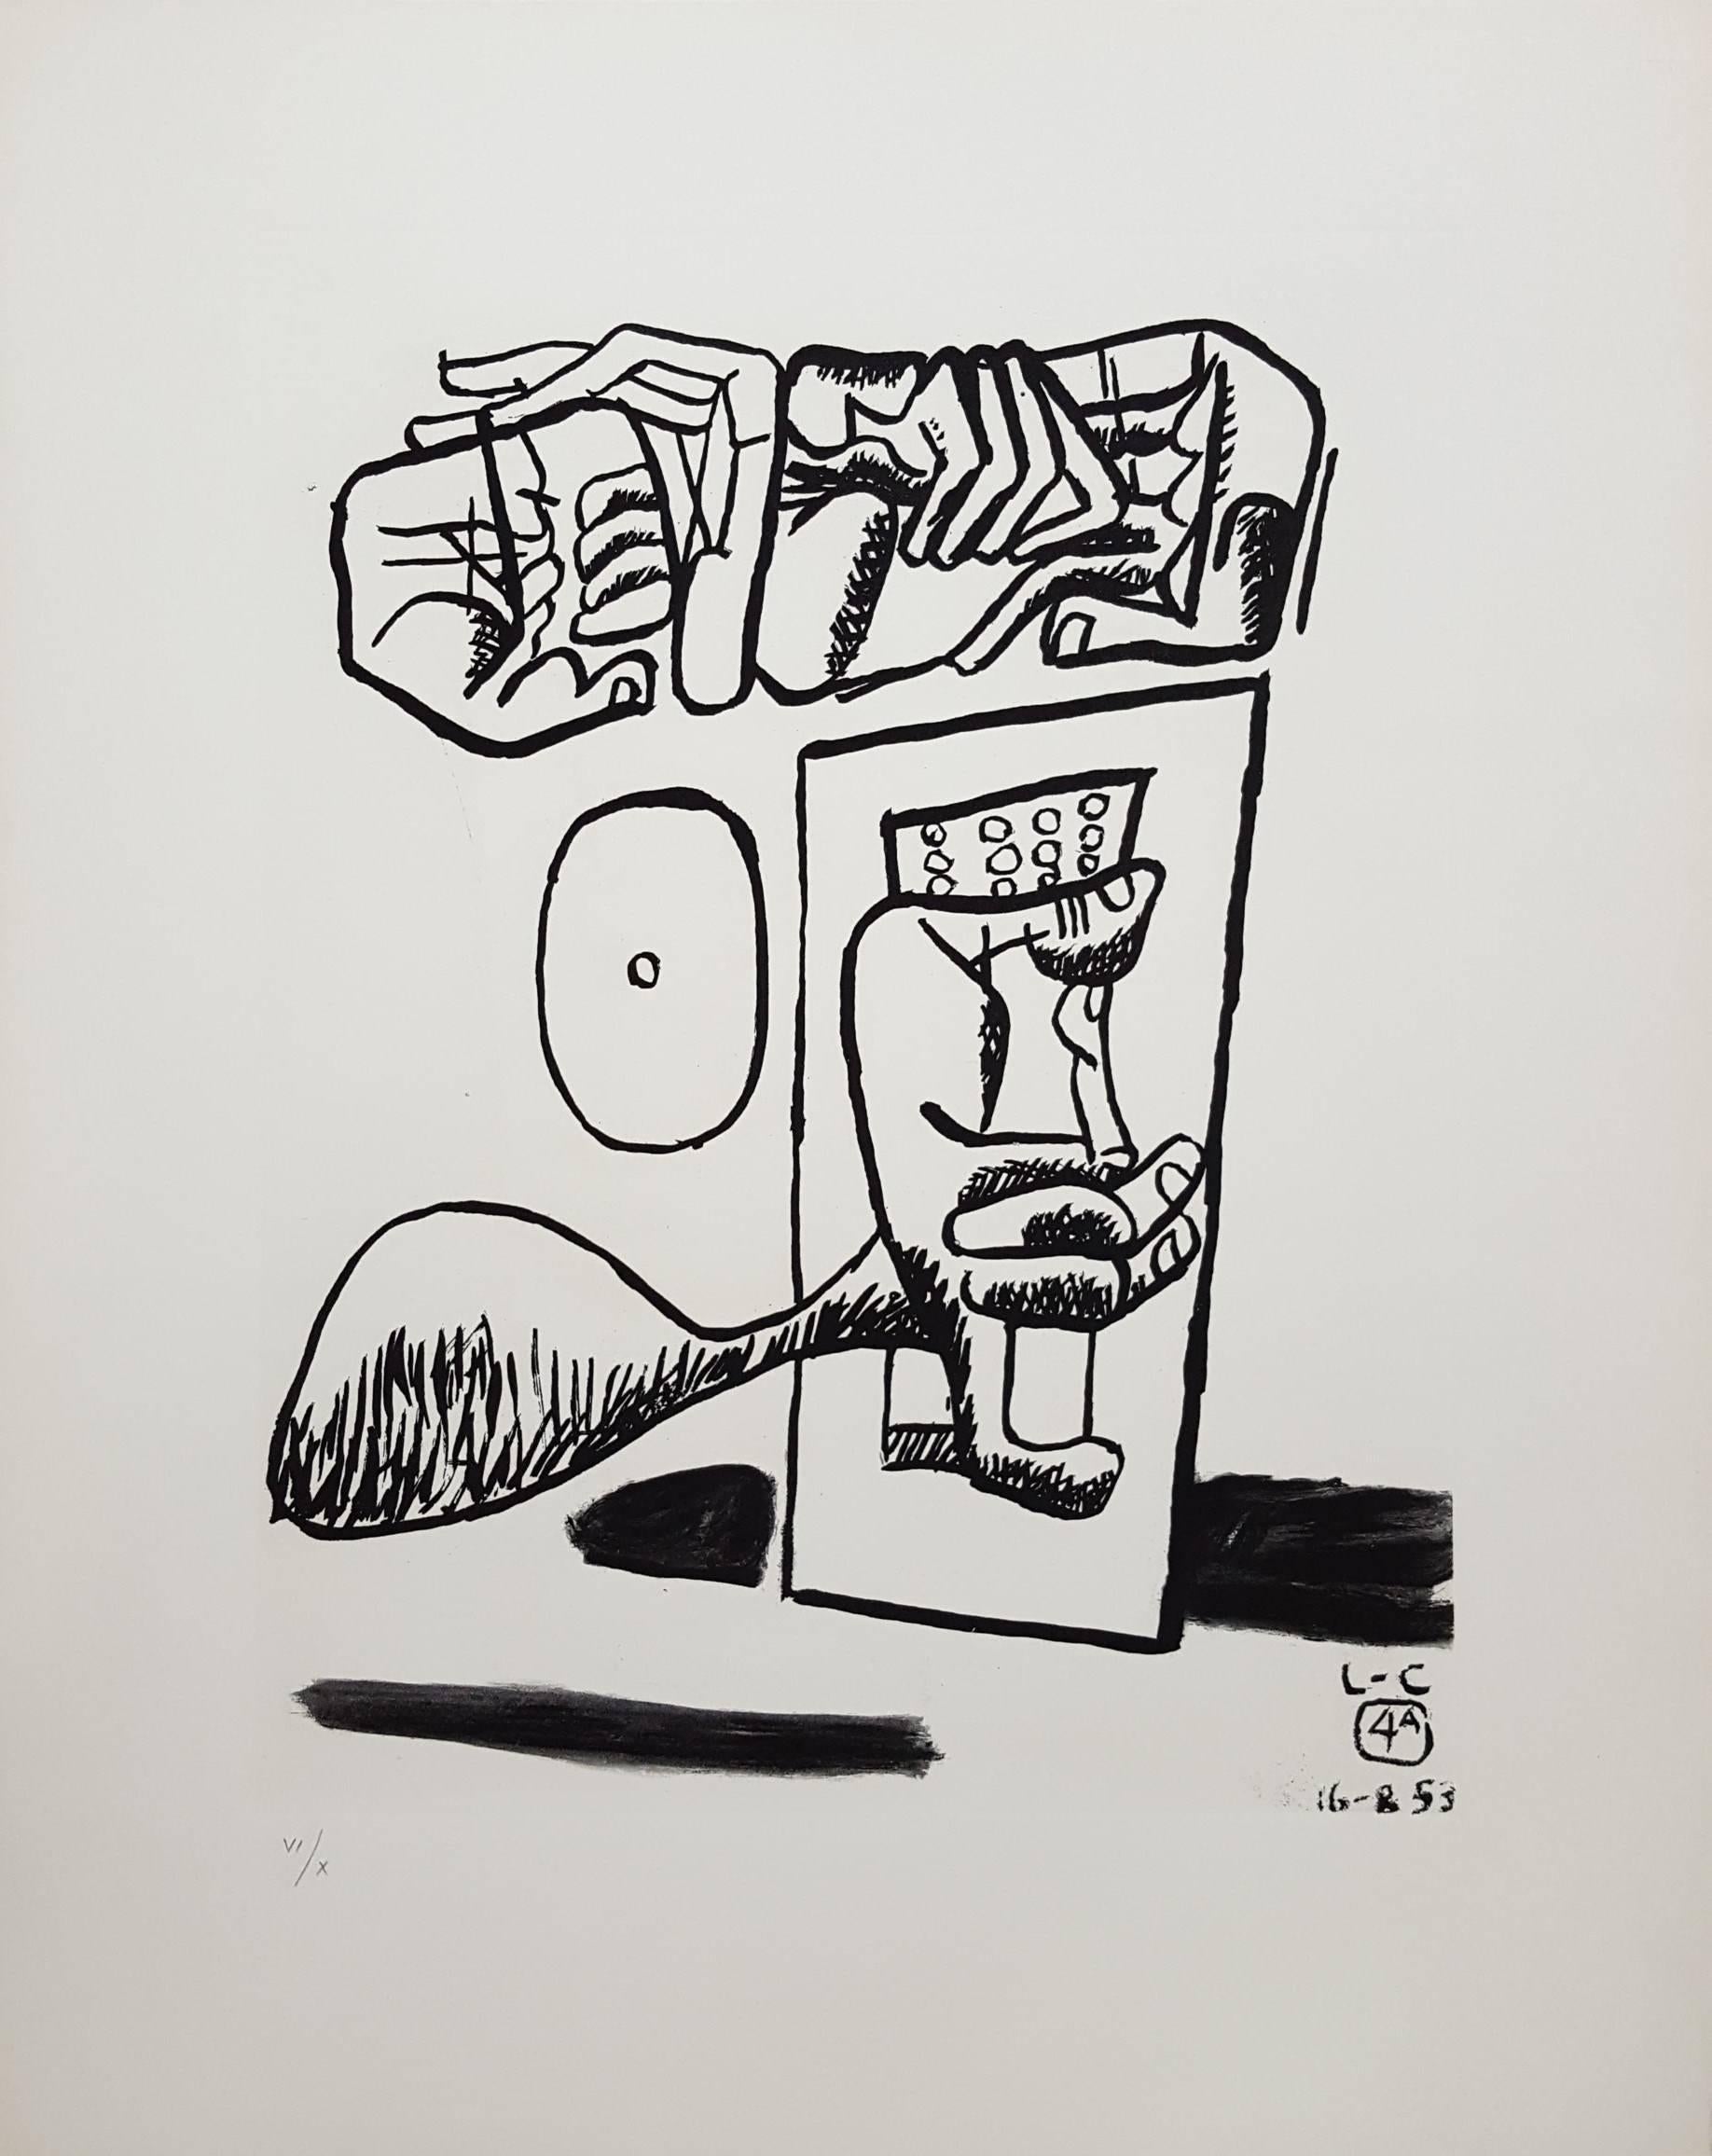 An original signed etching with aquatint on Rives BFK paper by French-Swiss artist Le Corbusier (Charles-Édouard Jeanneret) (1887-1965) titled 